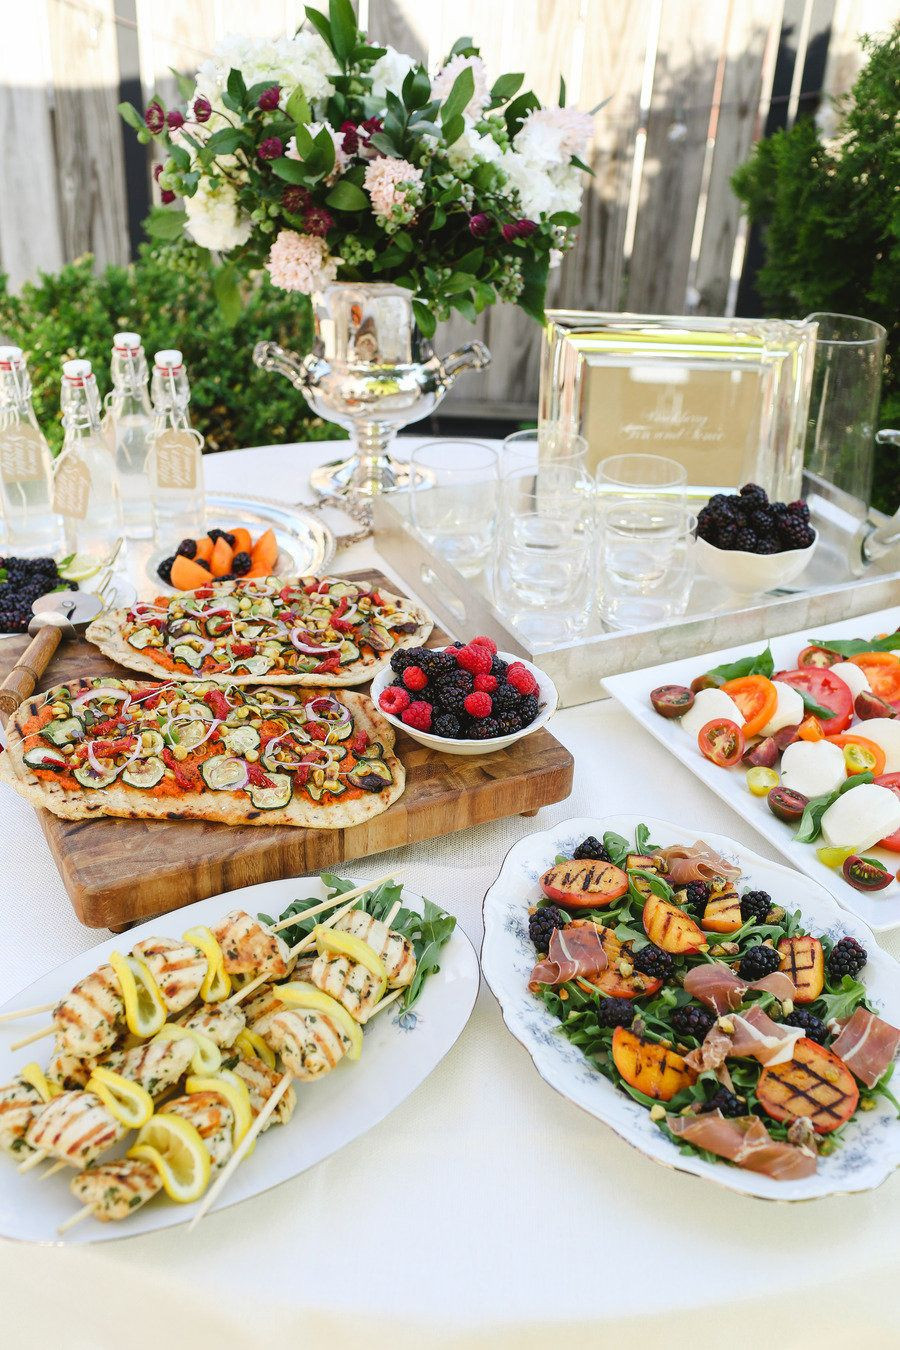 Engagement Party Catering Ideas
 A Manhattan Rooftop Engagement Party from Clare Langan